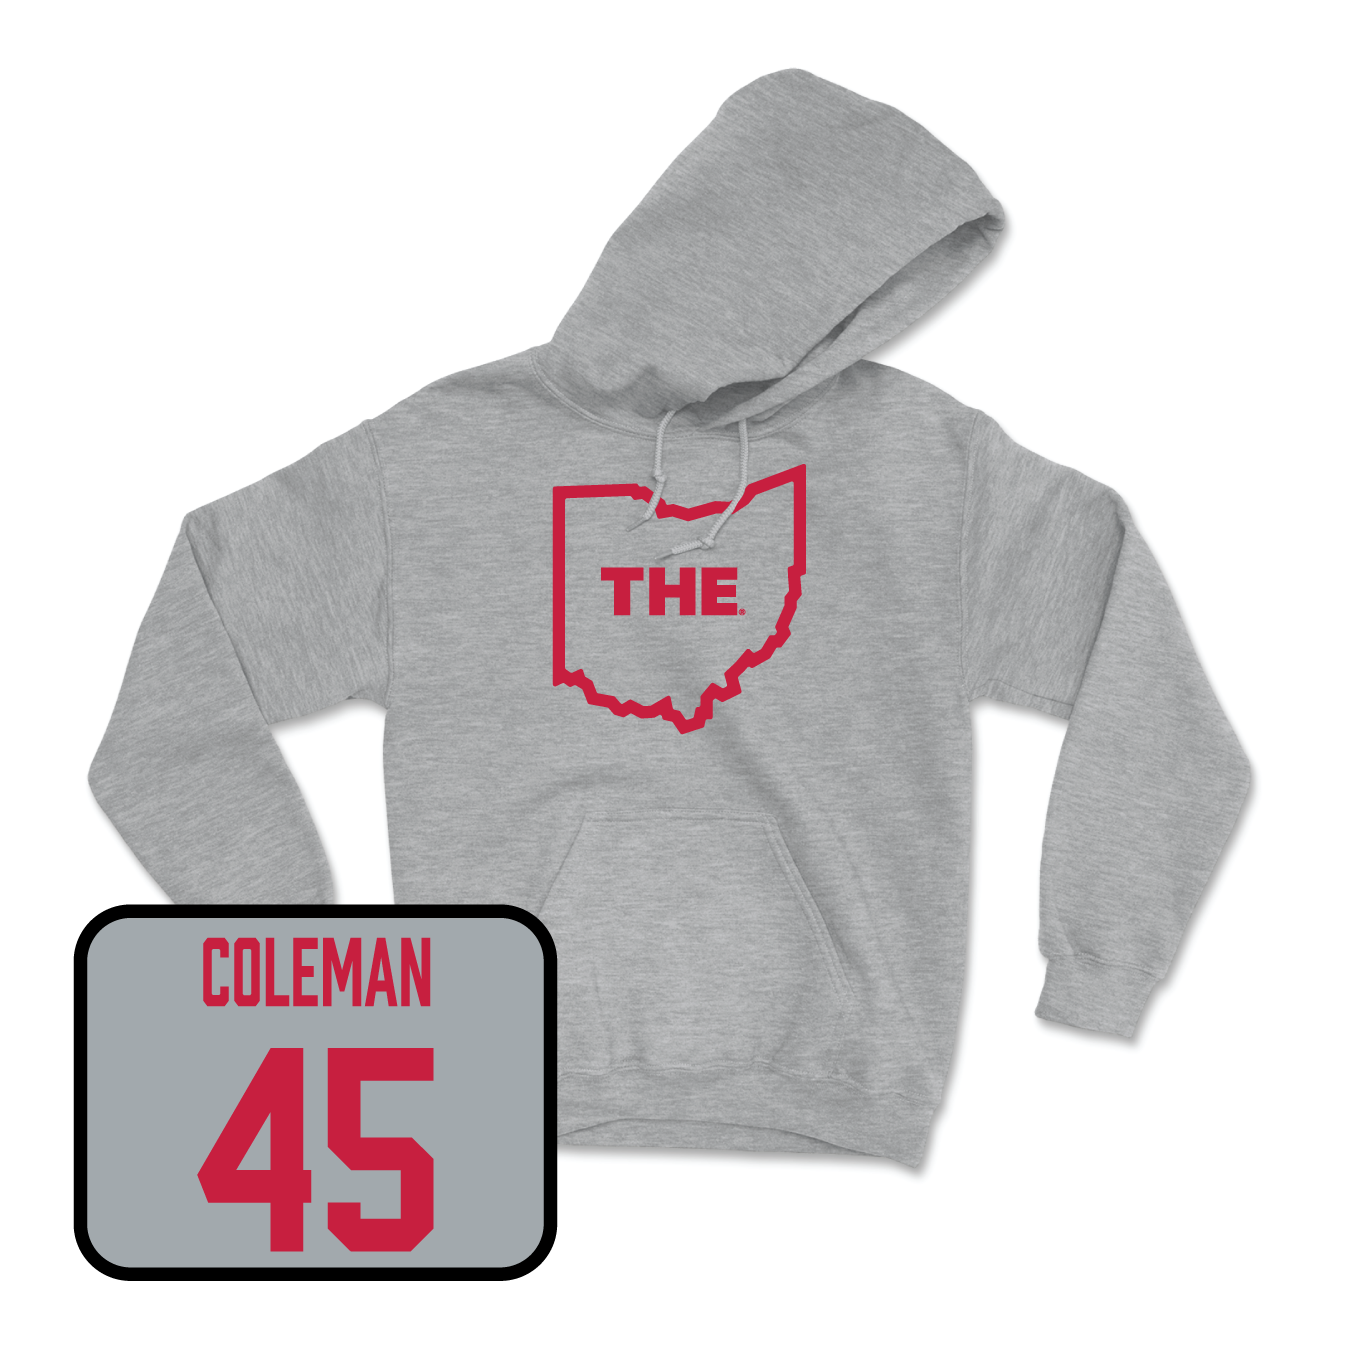 Sport Grey Women's Lacrosse The Hoodie 4 Youth Small / Zoe Coleman | #45